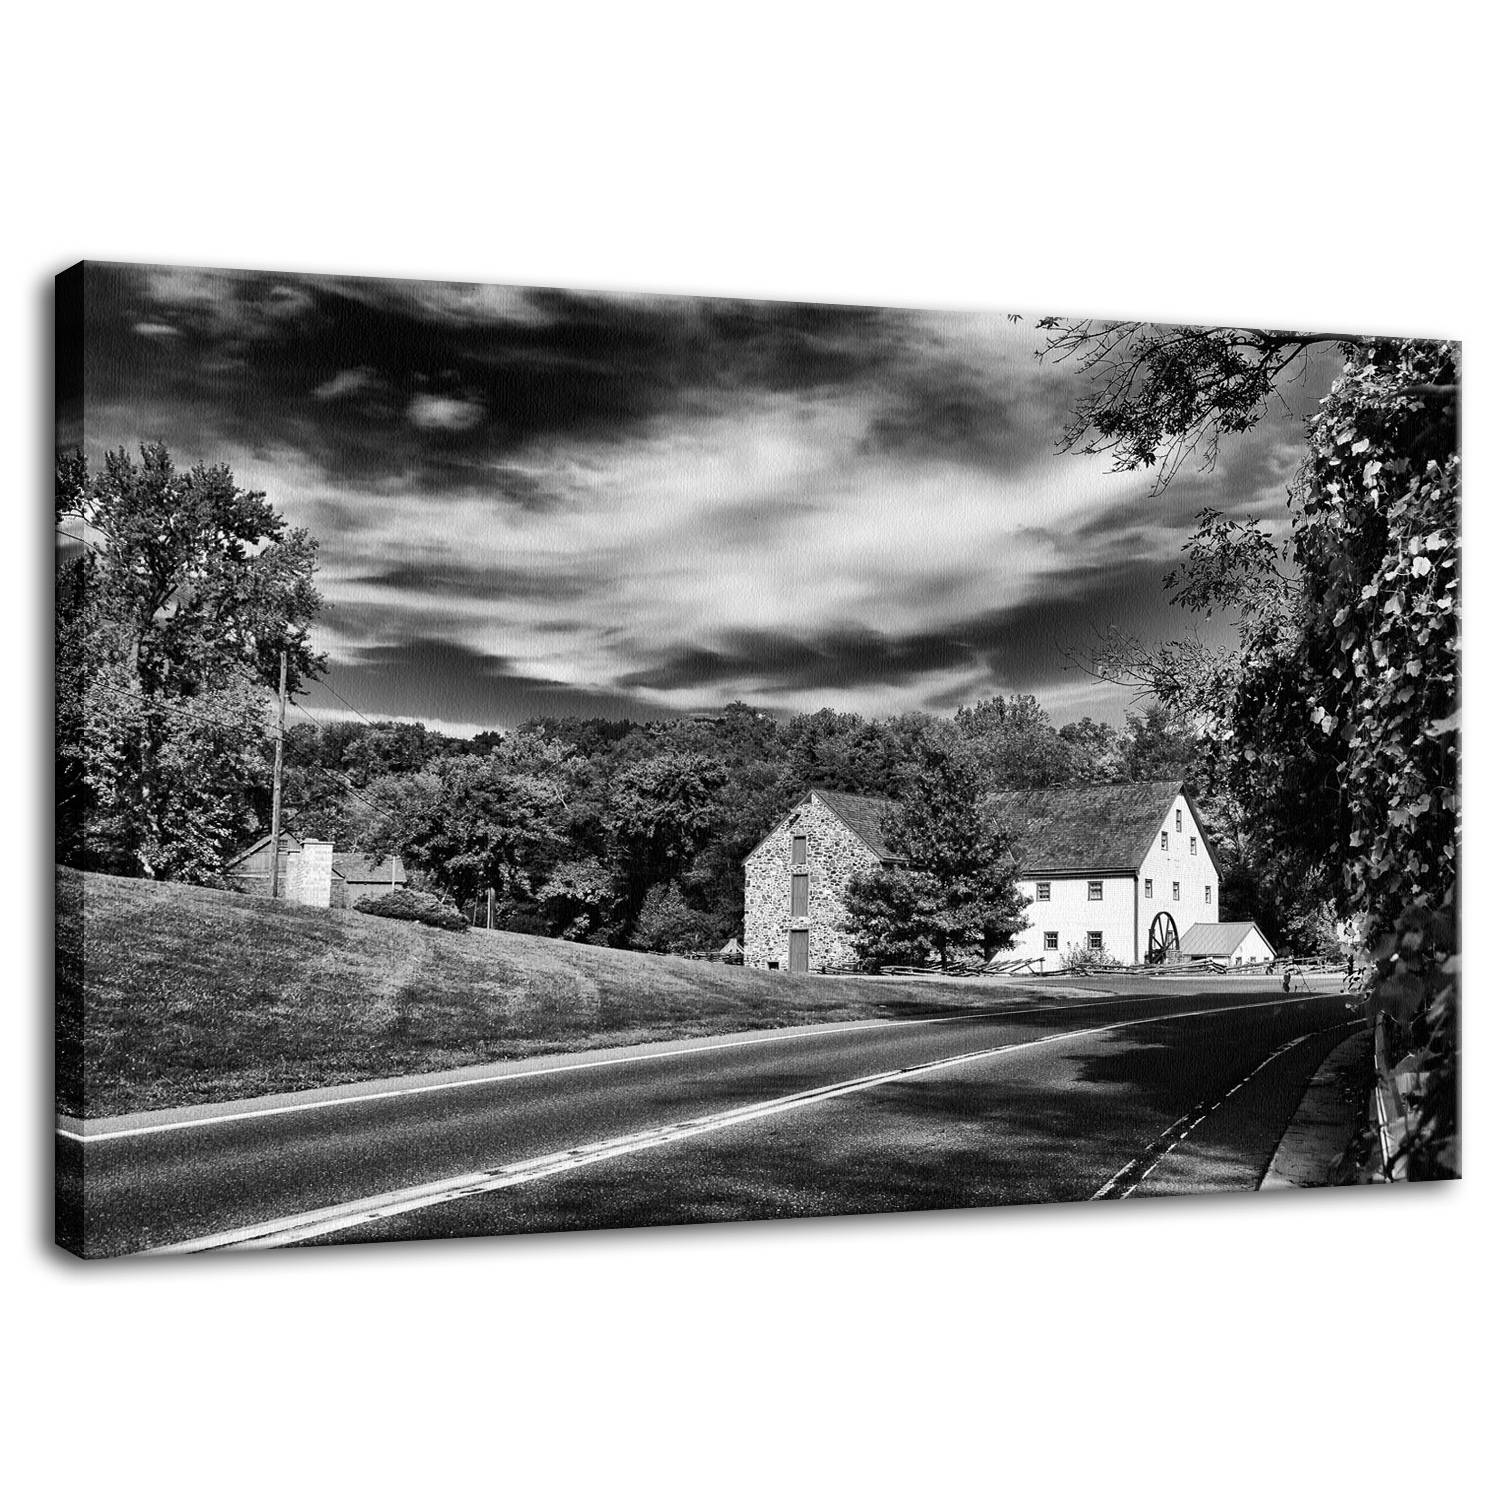 Greenbank Mill Summer in Black and White Fine Art Canvas Wall Art Prints  - PIPAFINEART